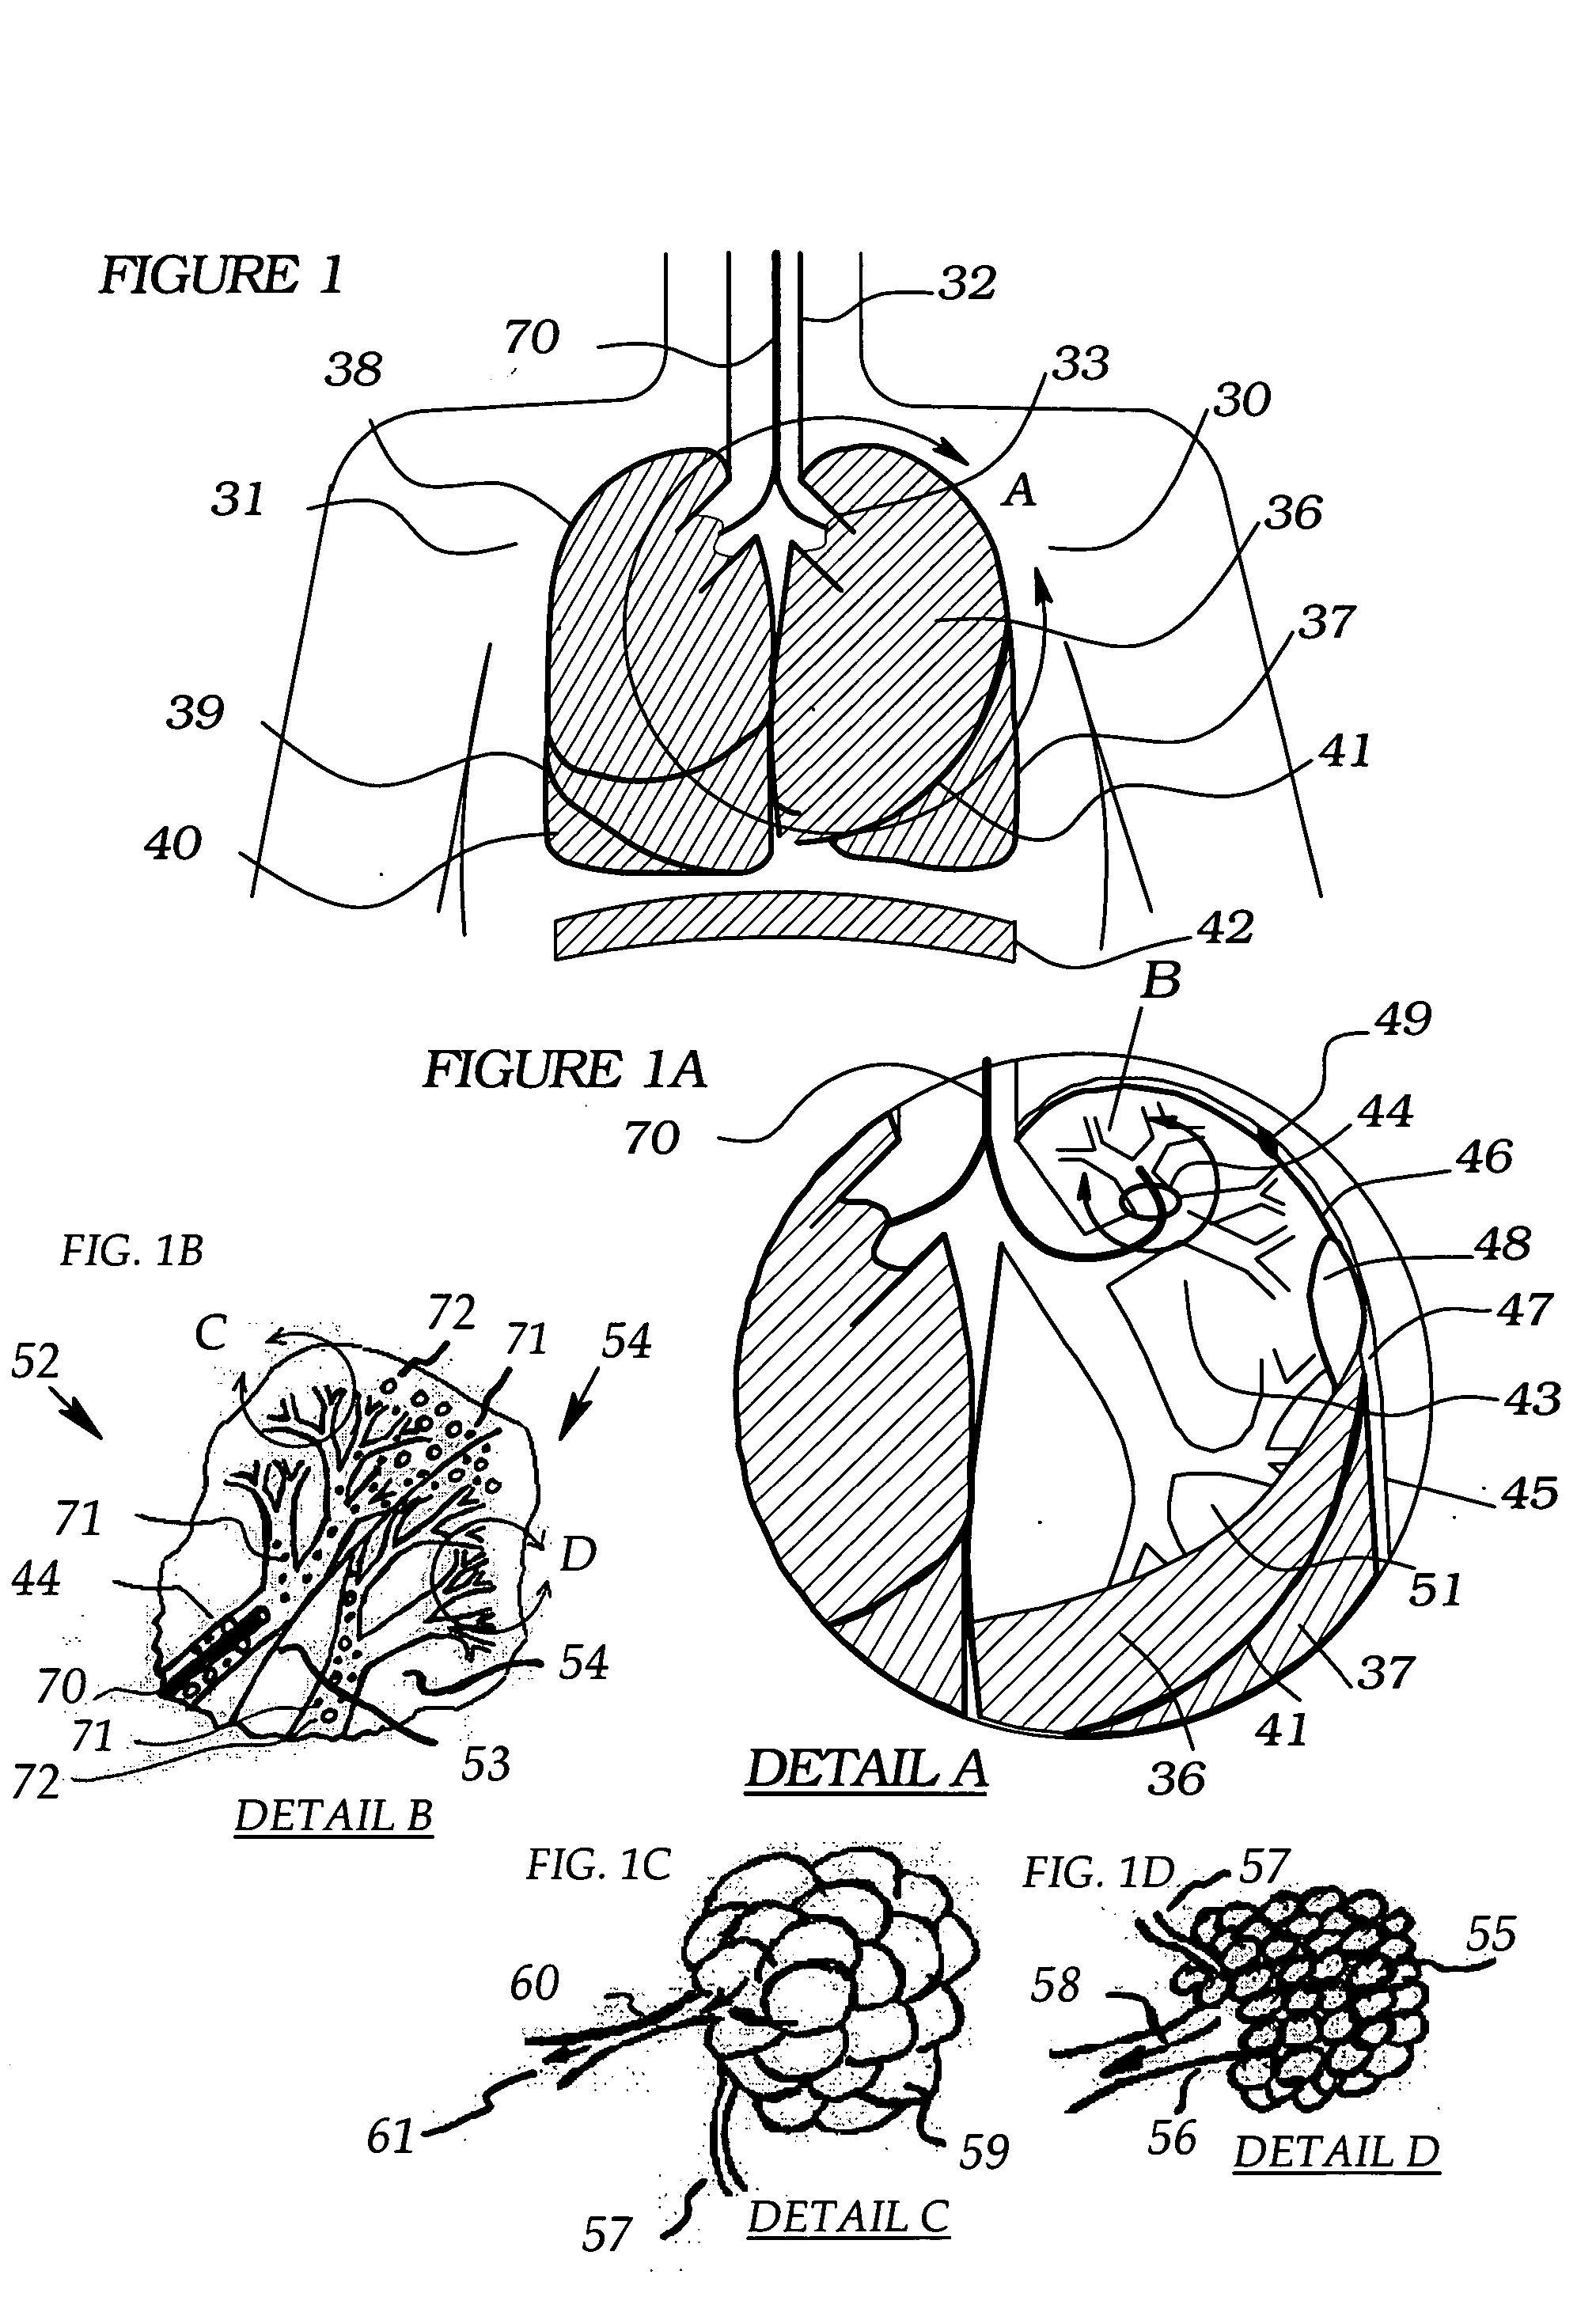 Methods, systems and devices for desufflating a lung area